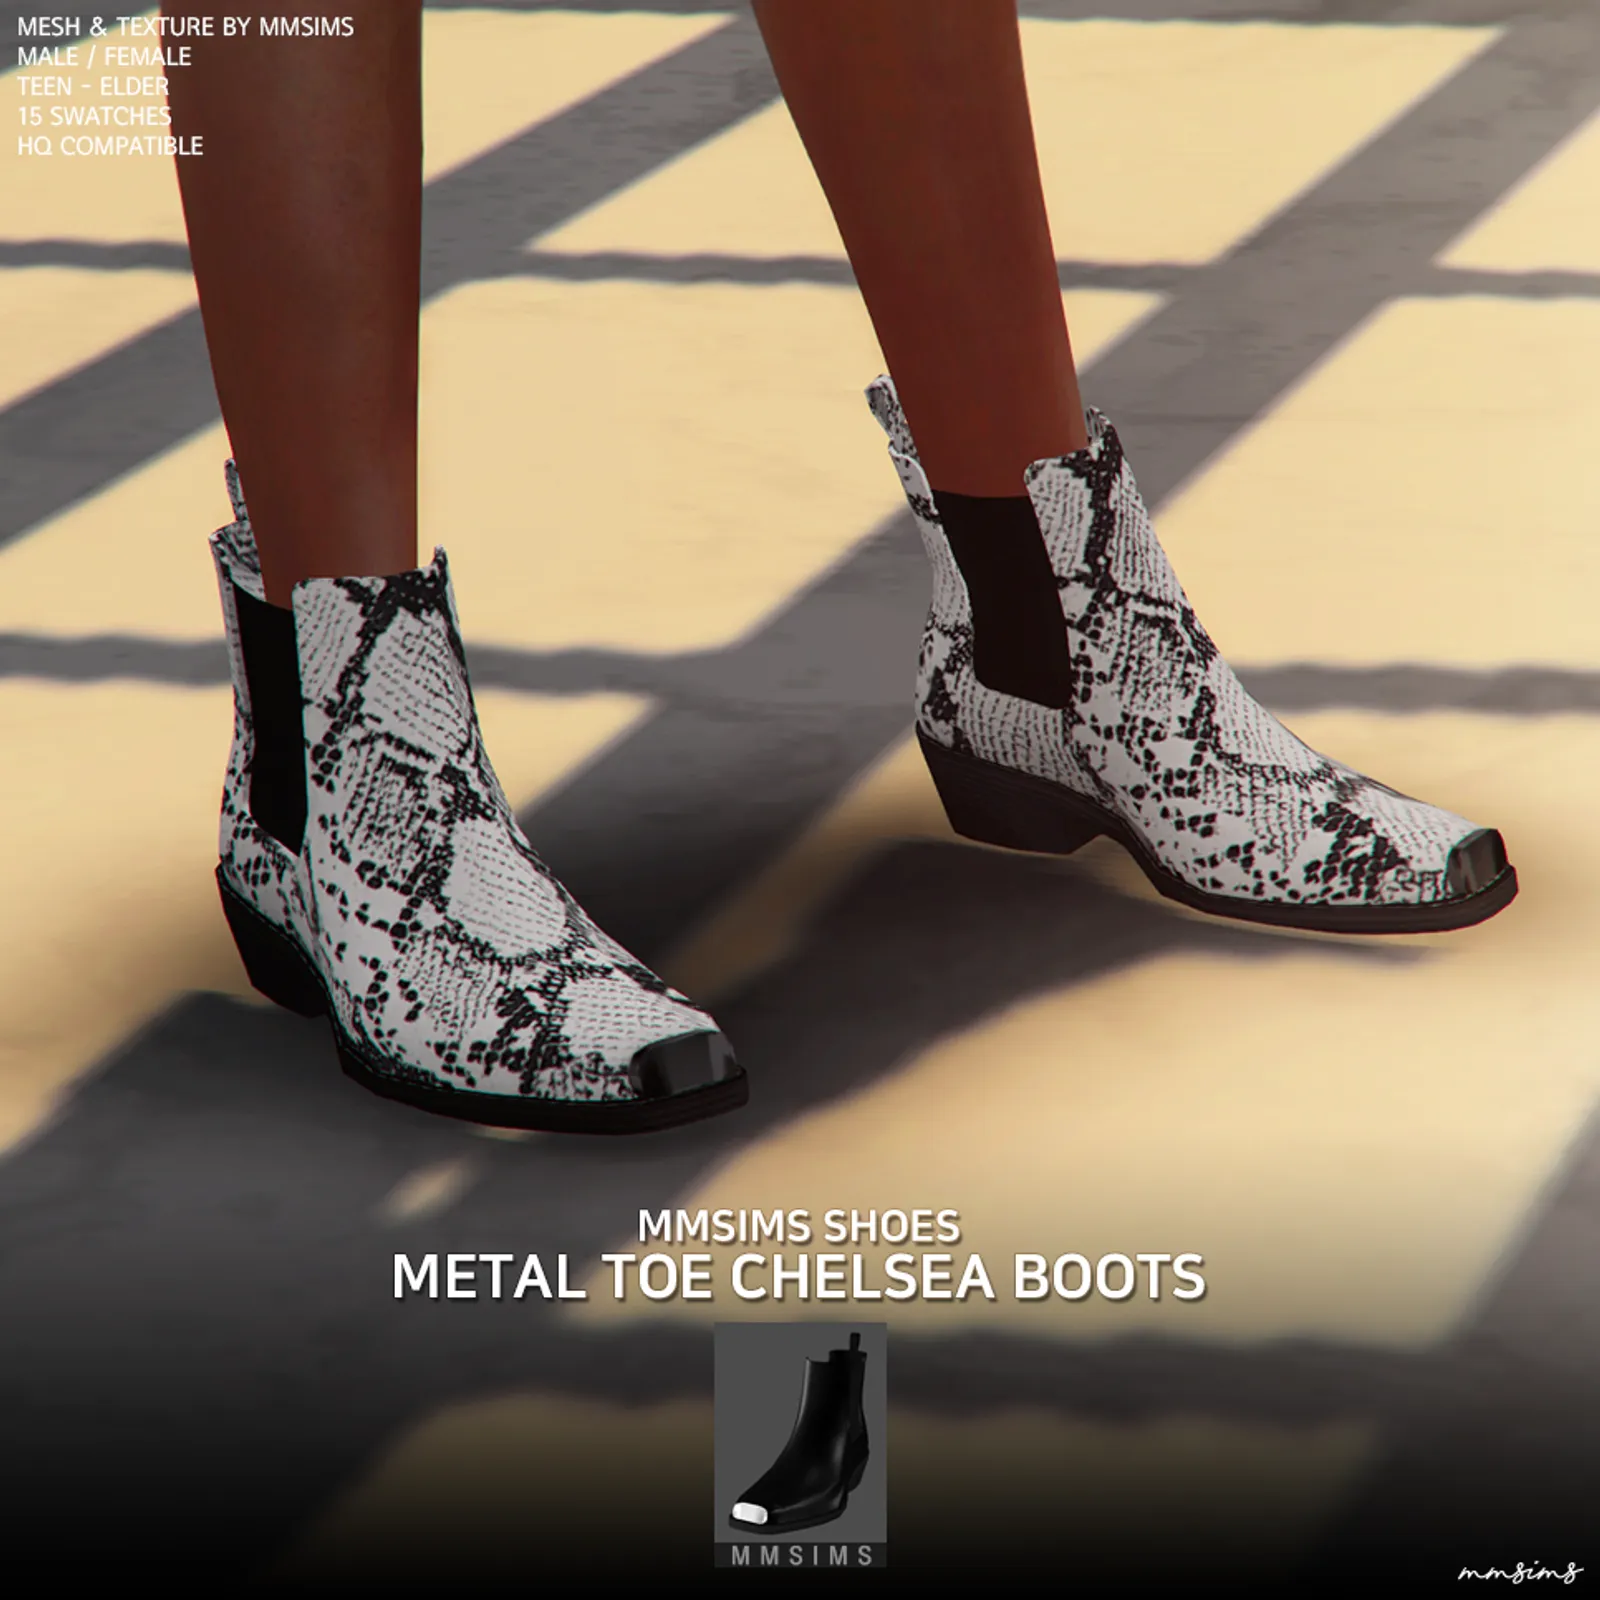 MMSIMS Shoes Metal toe Chelsea boots